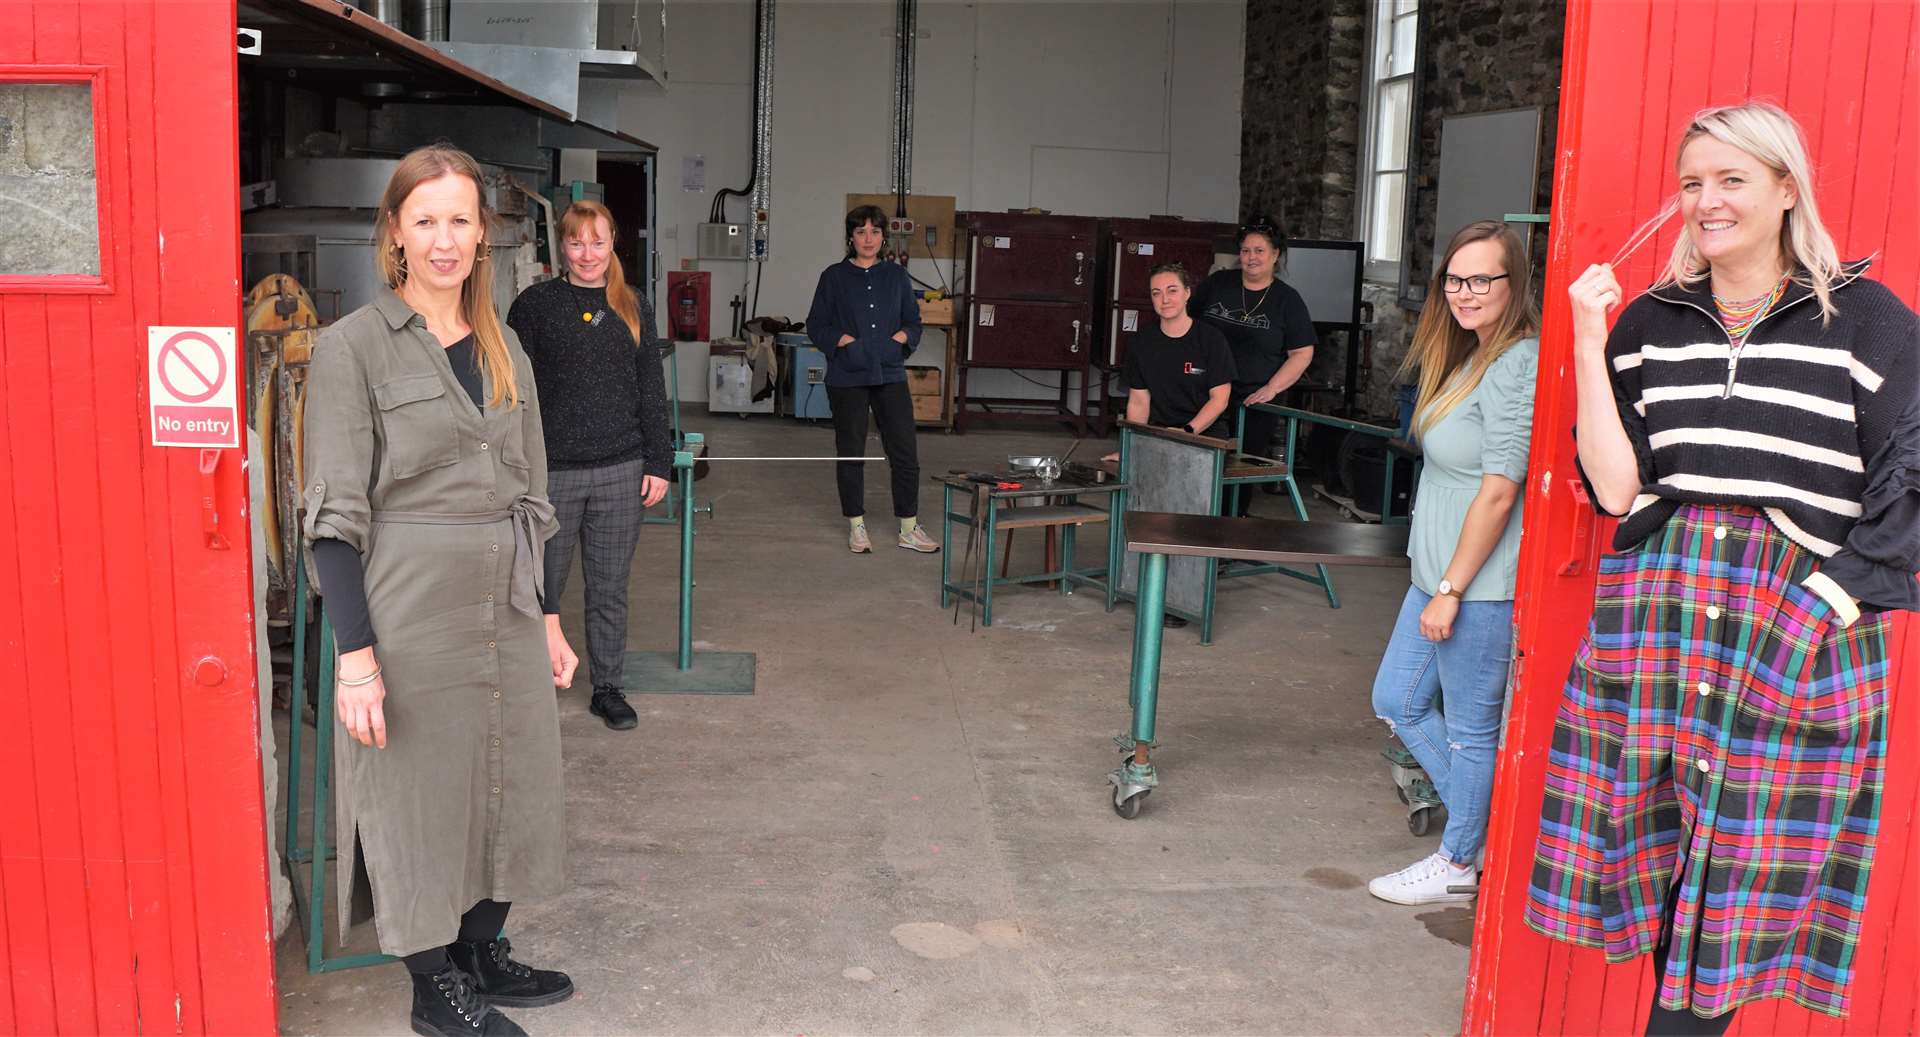 Staff at the glass studio workshop of North Lands Creative in Lybster. Picture: DGS